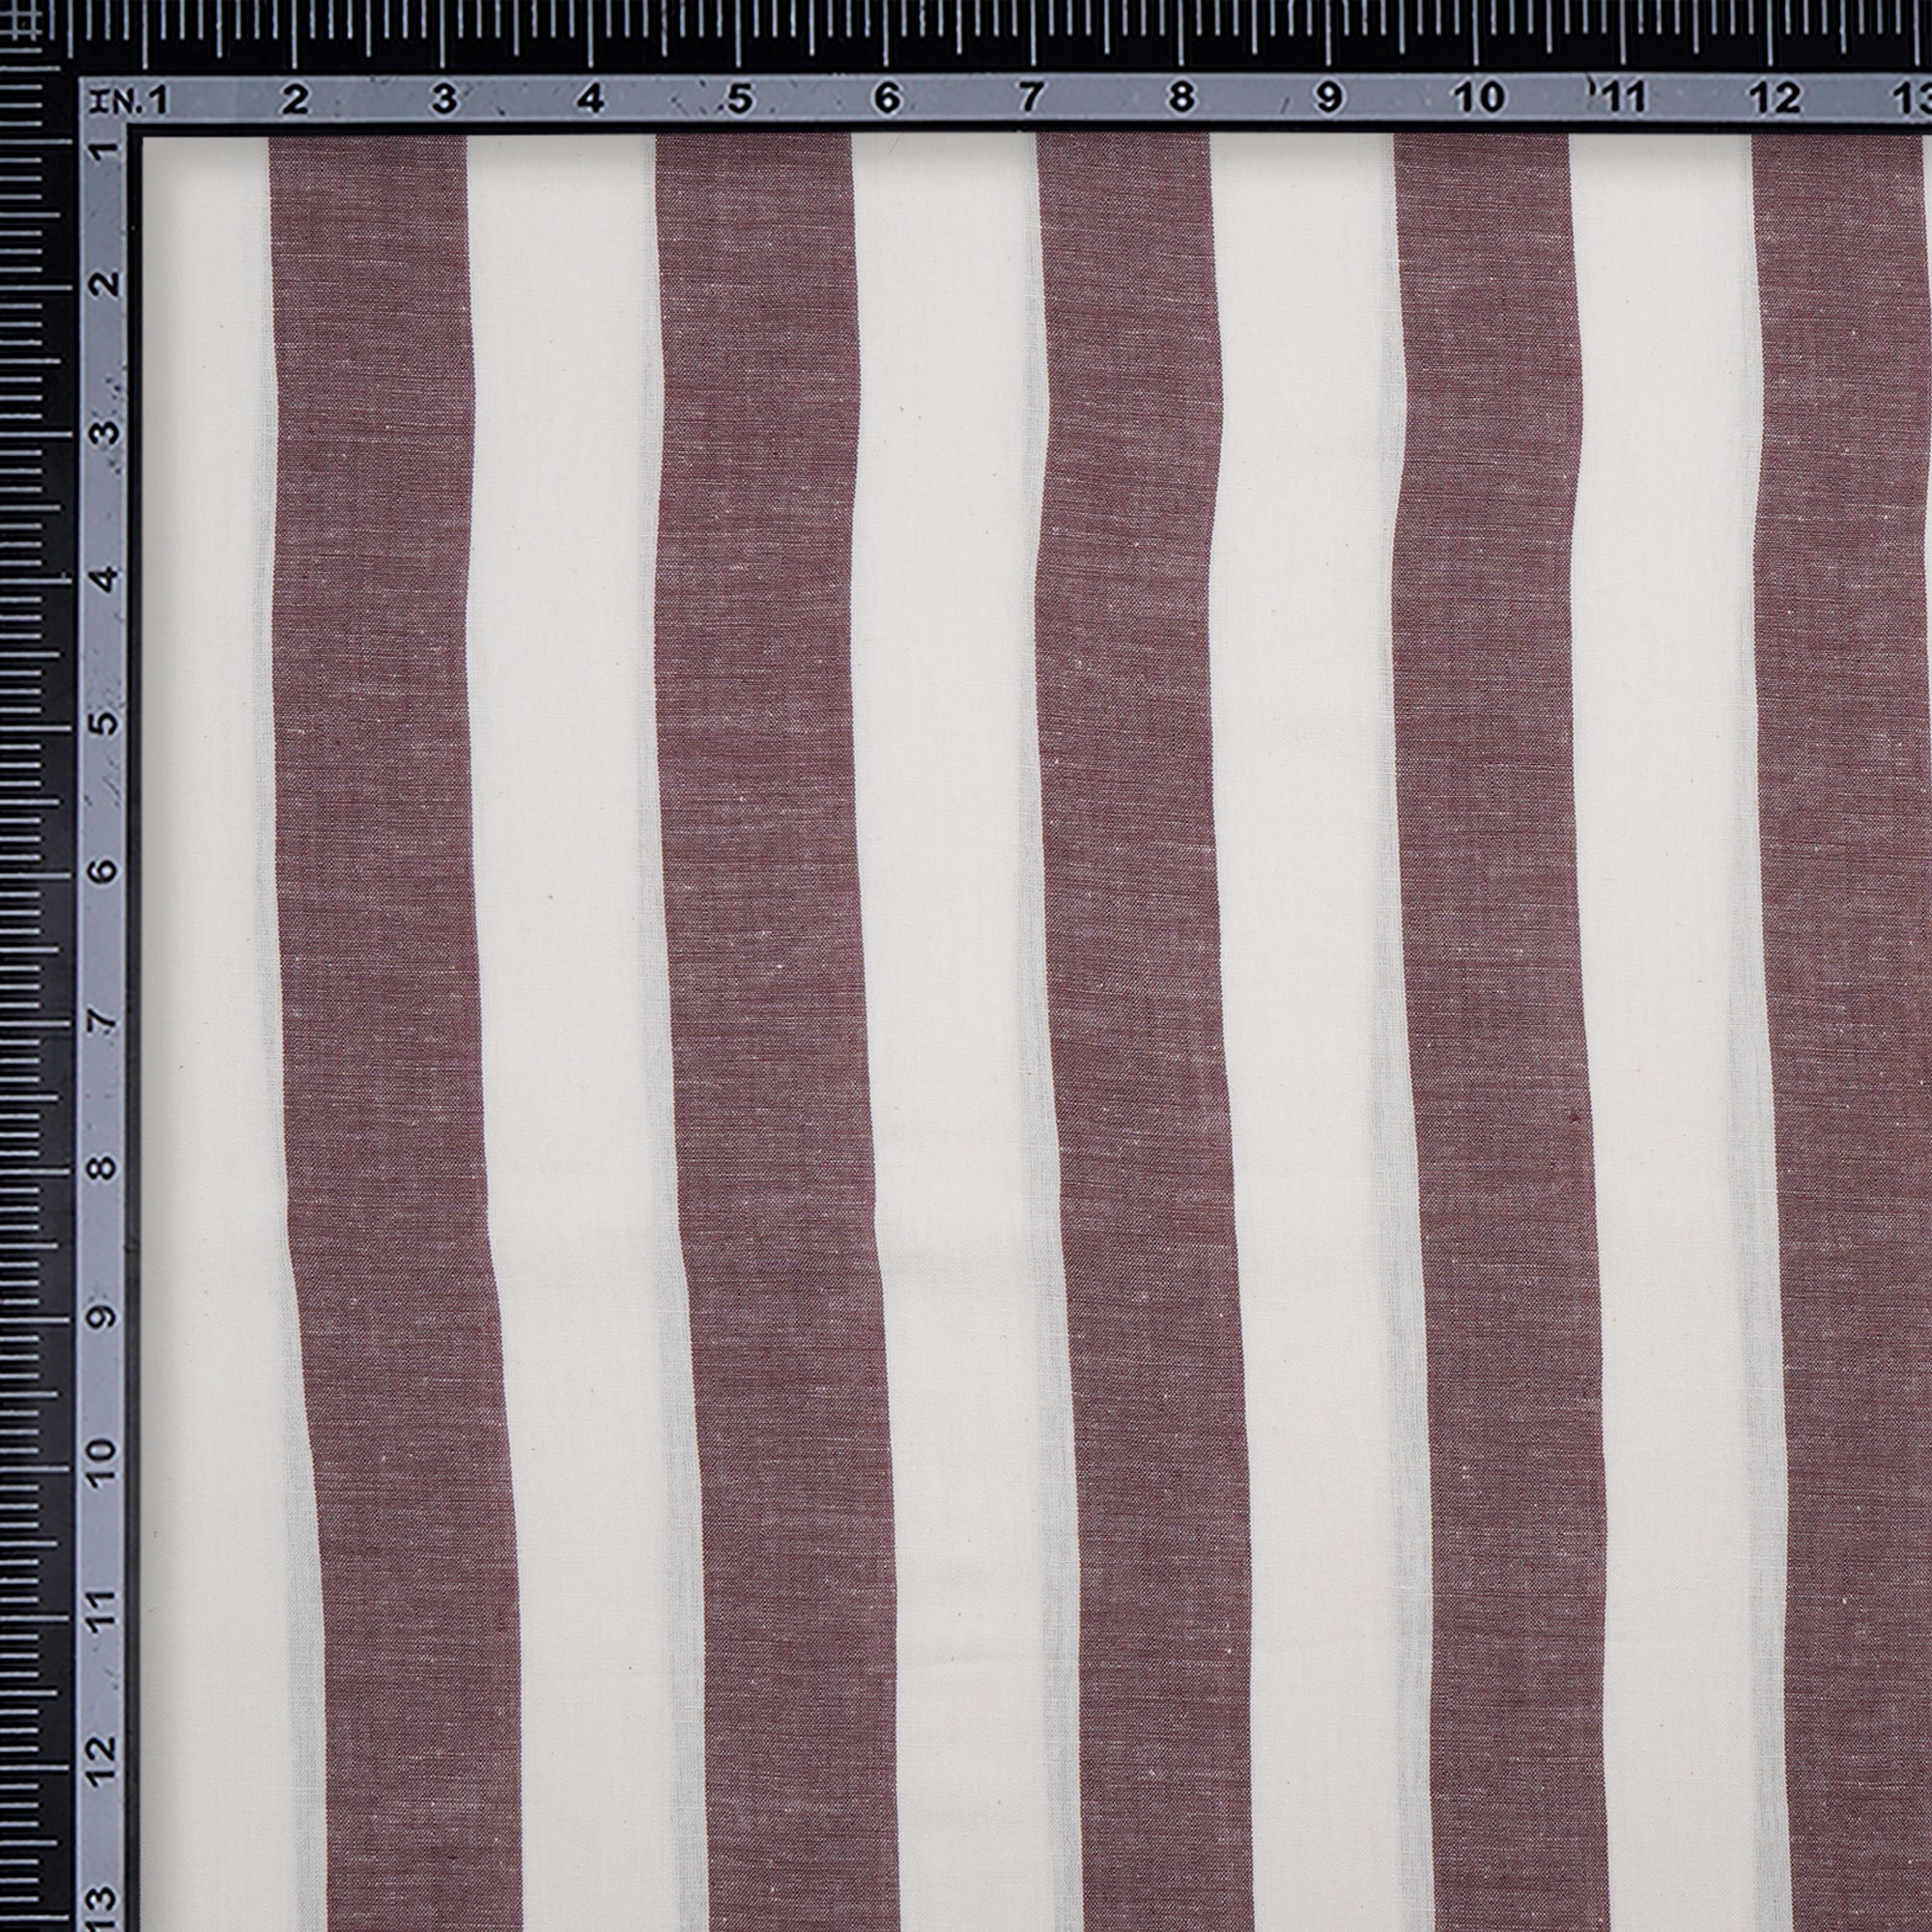 White-Brown Striped Pattern Handwoven Cotton Fabric